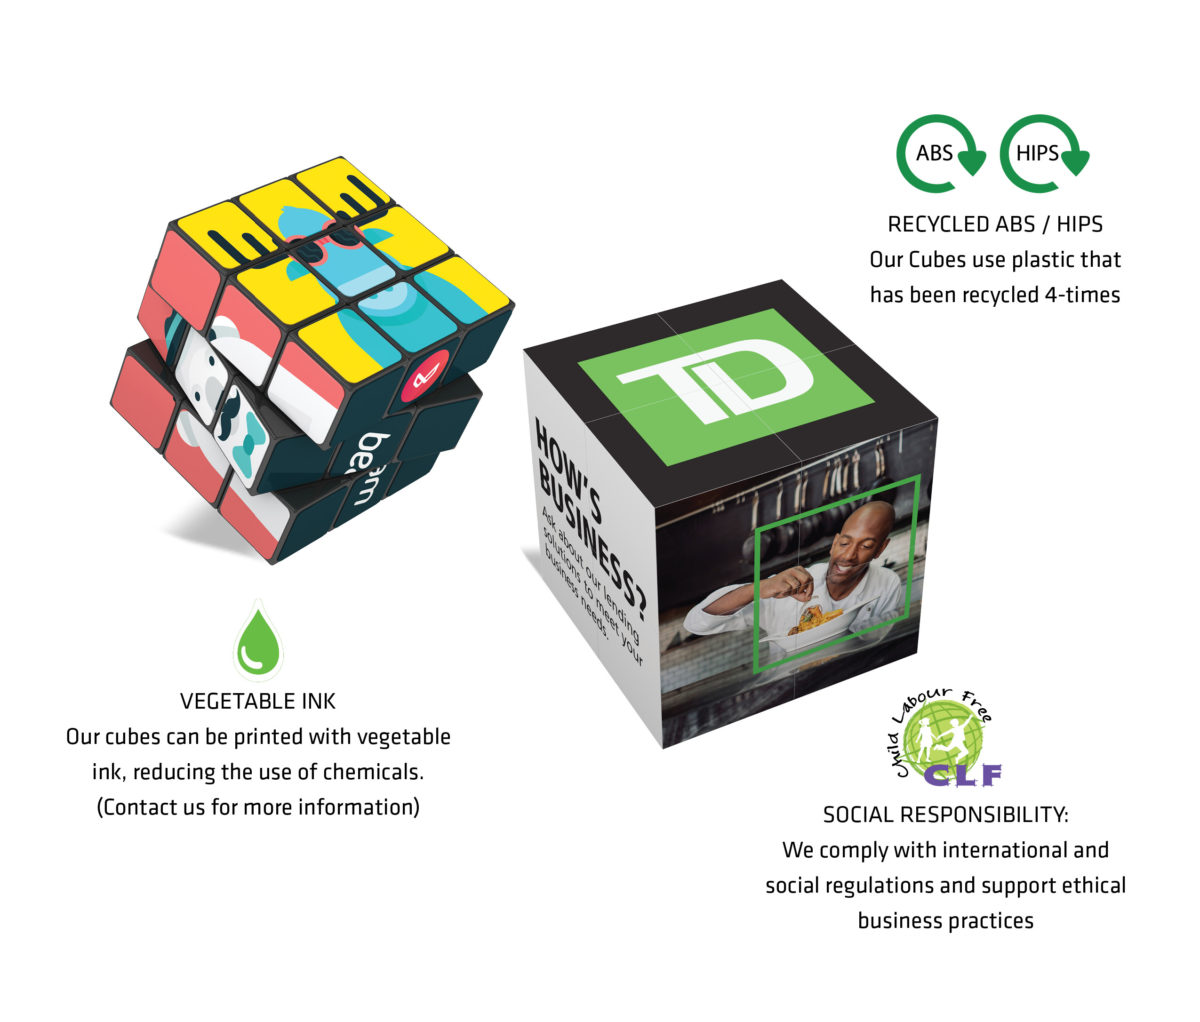 Our cubes are made from recycled material